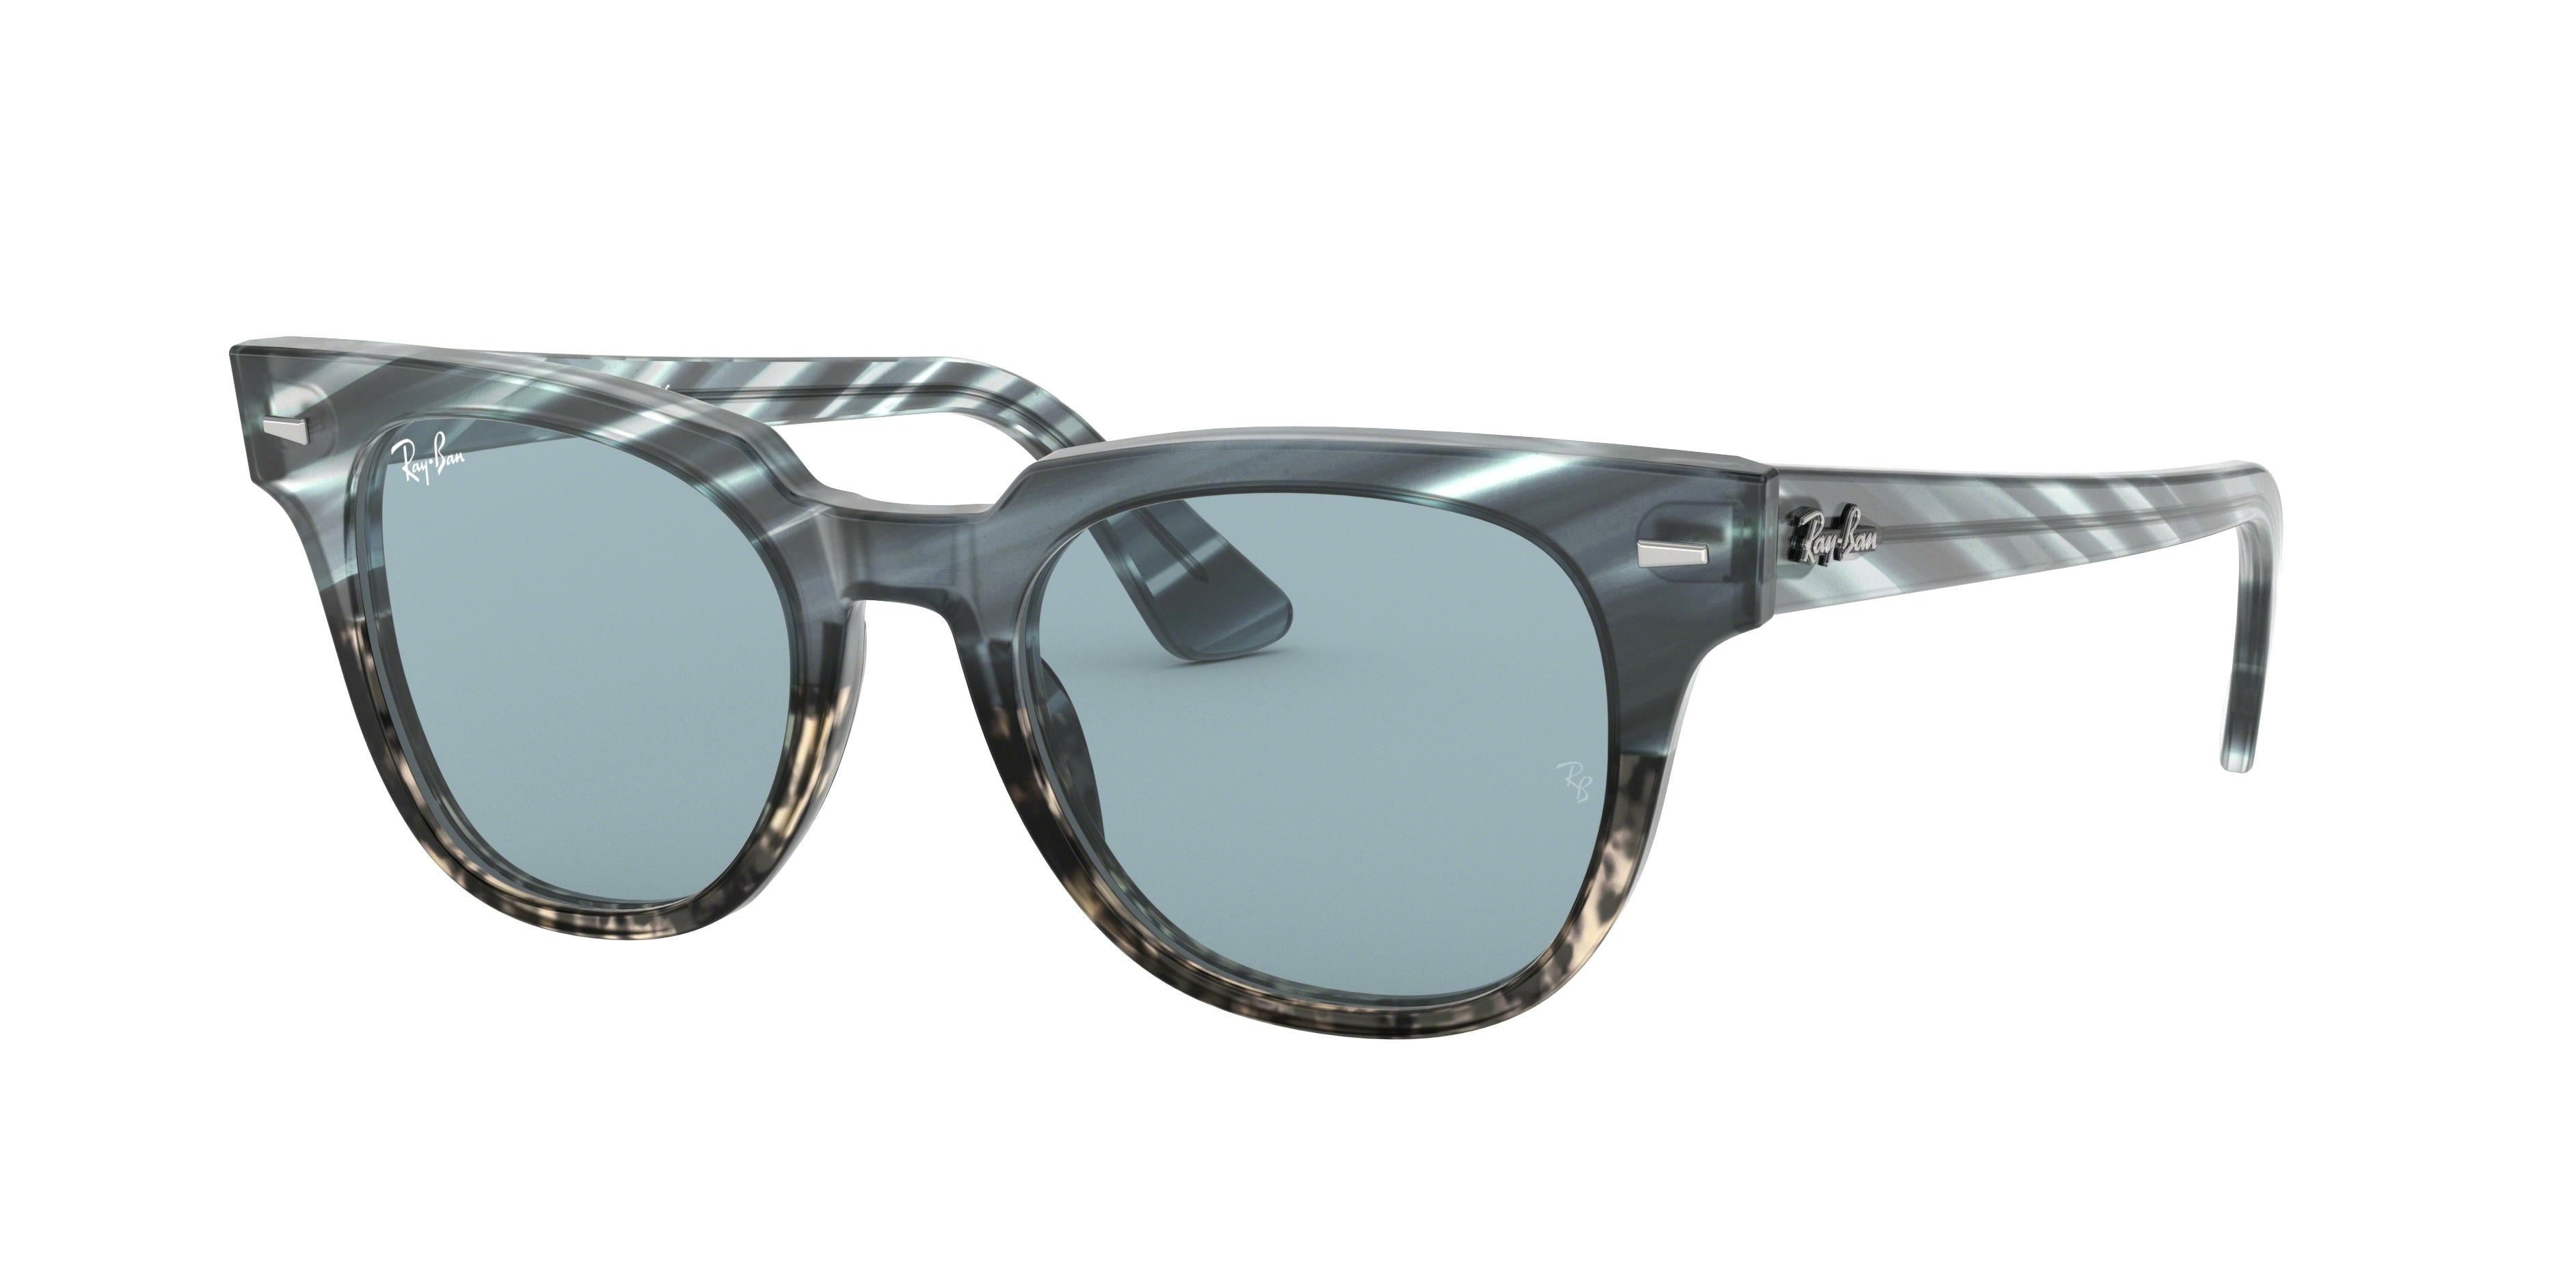 Ray-Ban METEOR RB2168 Square Sunglasses  125262-Striped Blue Grey 49-150-20 - Color Map Blue